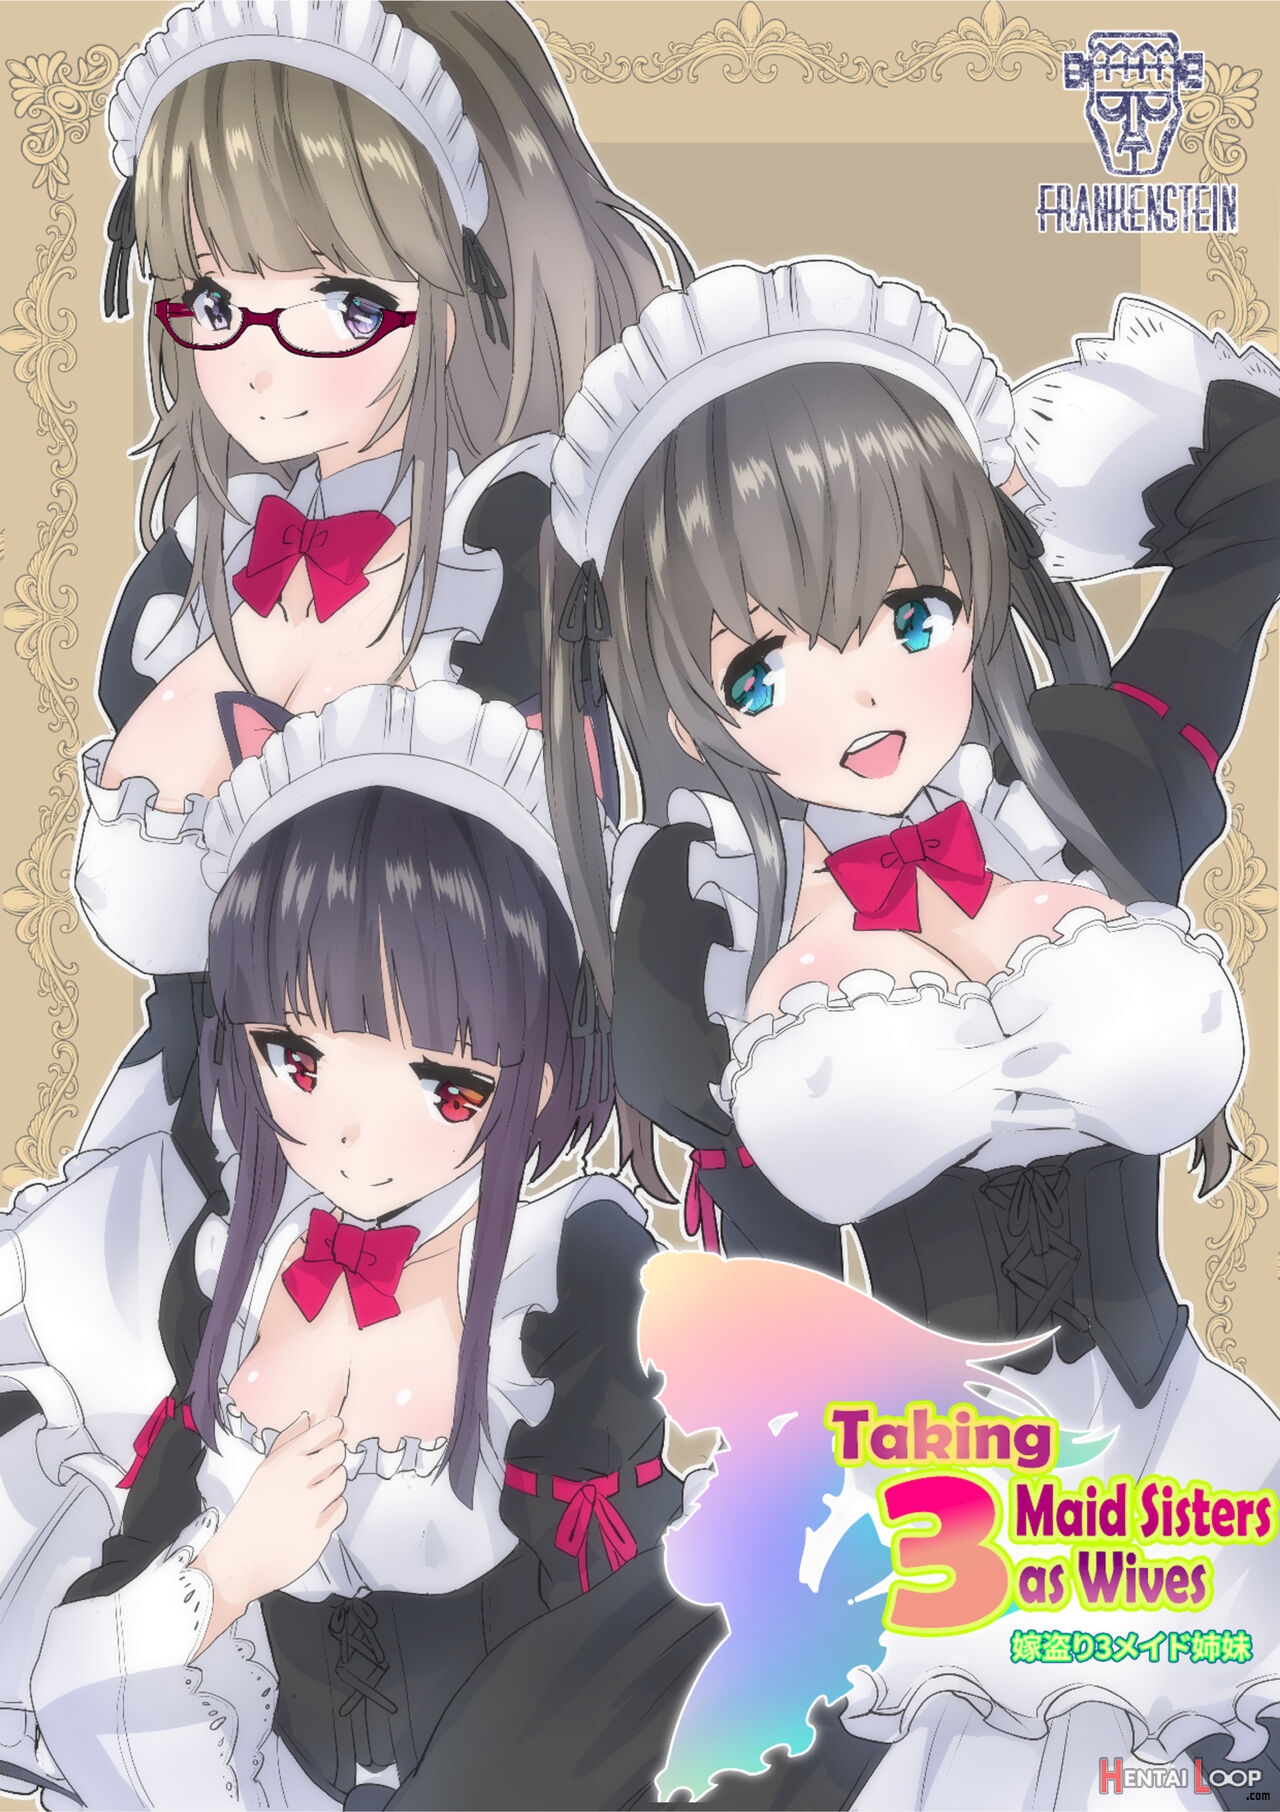 Taking 3 Maid Sisters As Wives page 1